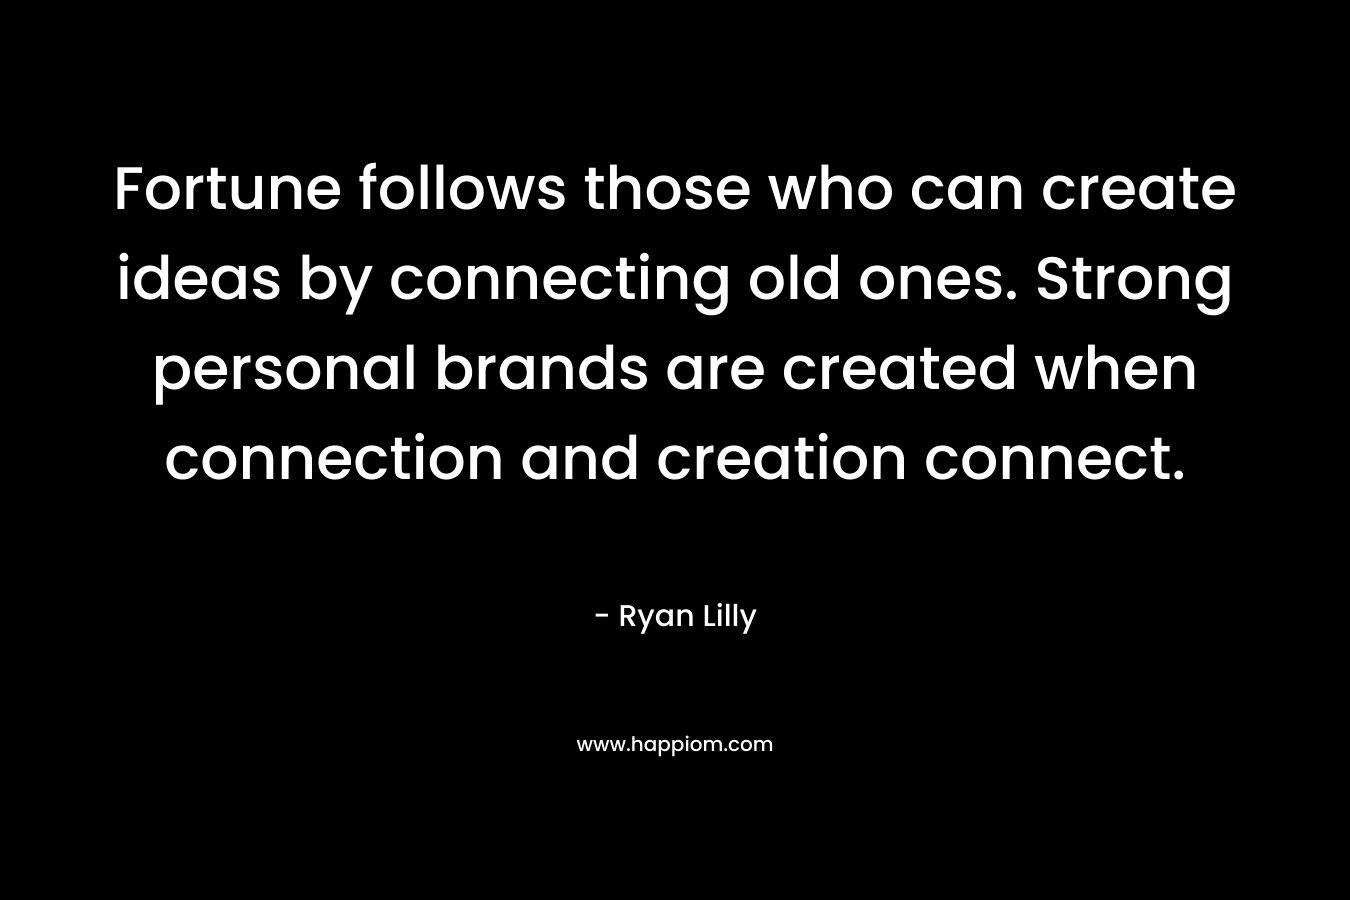 Fortune follows those who can create ideas by connecting old ones. Strong personal brands are created when connection and creation connect. – Ryan Lilly